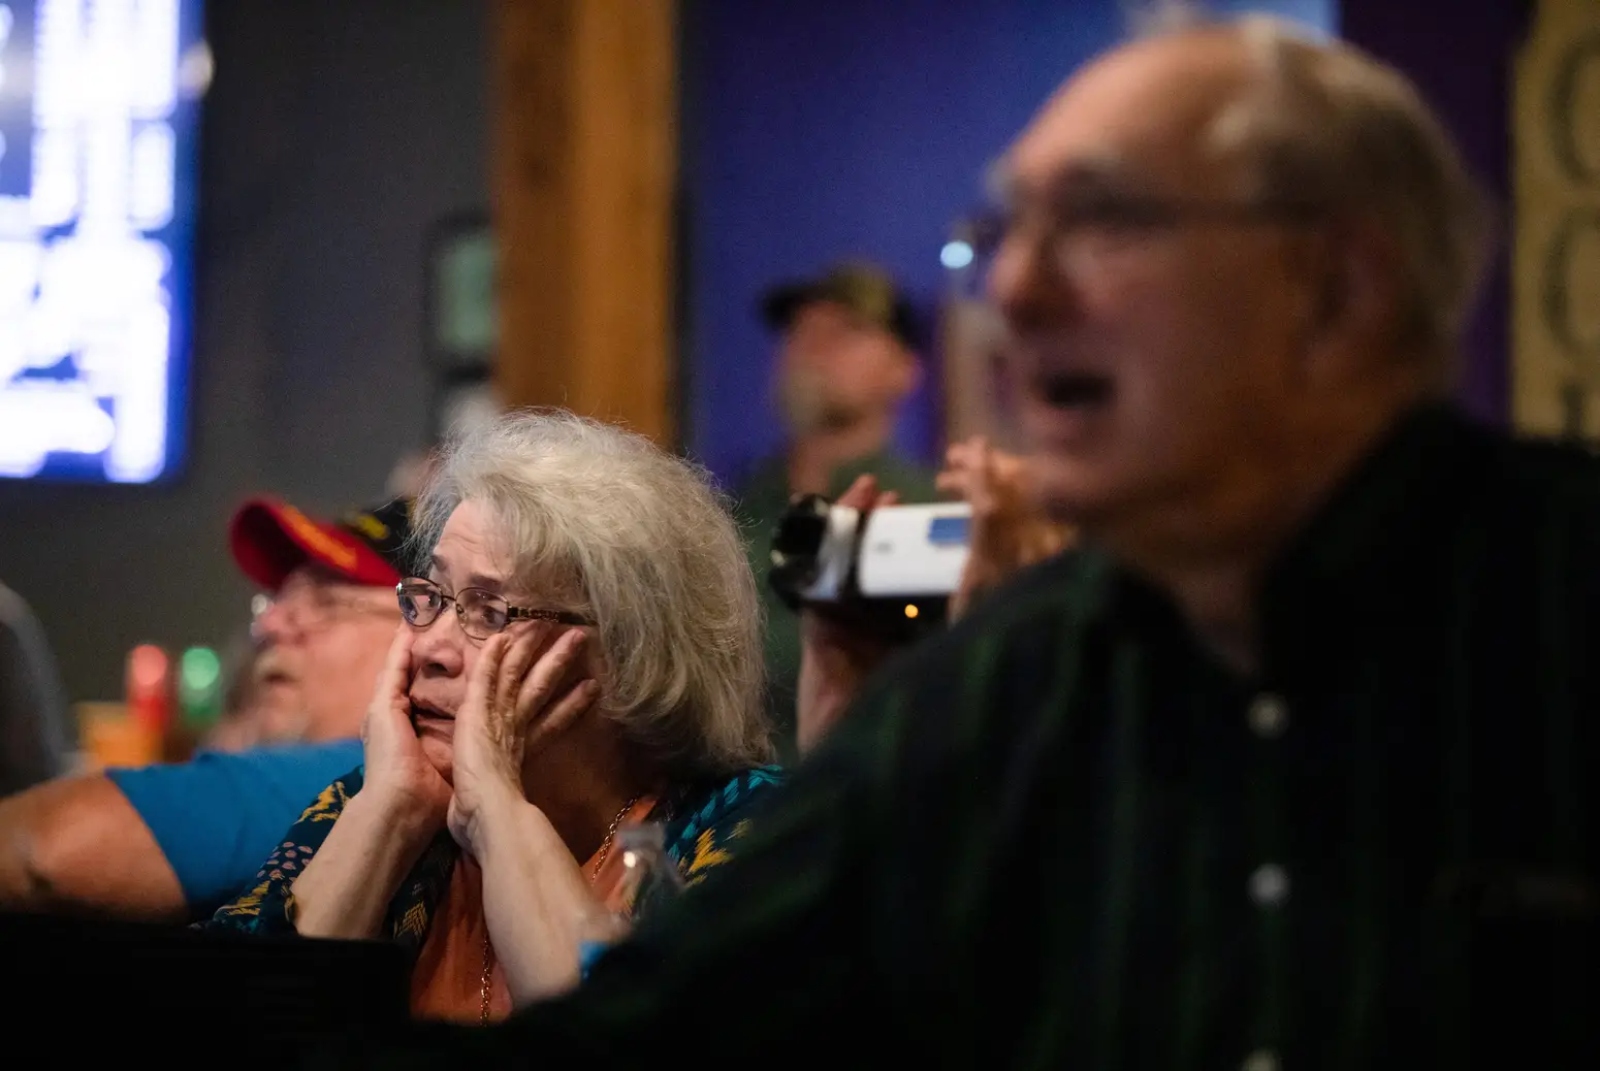 An older woman in glasses grips the sides of her face as a man next to her yells.